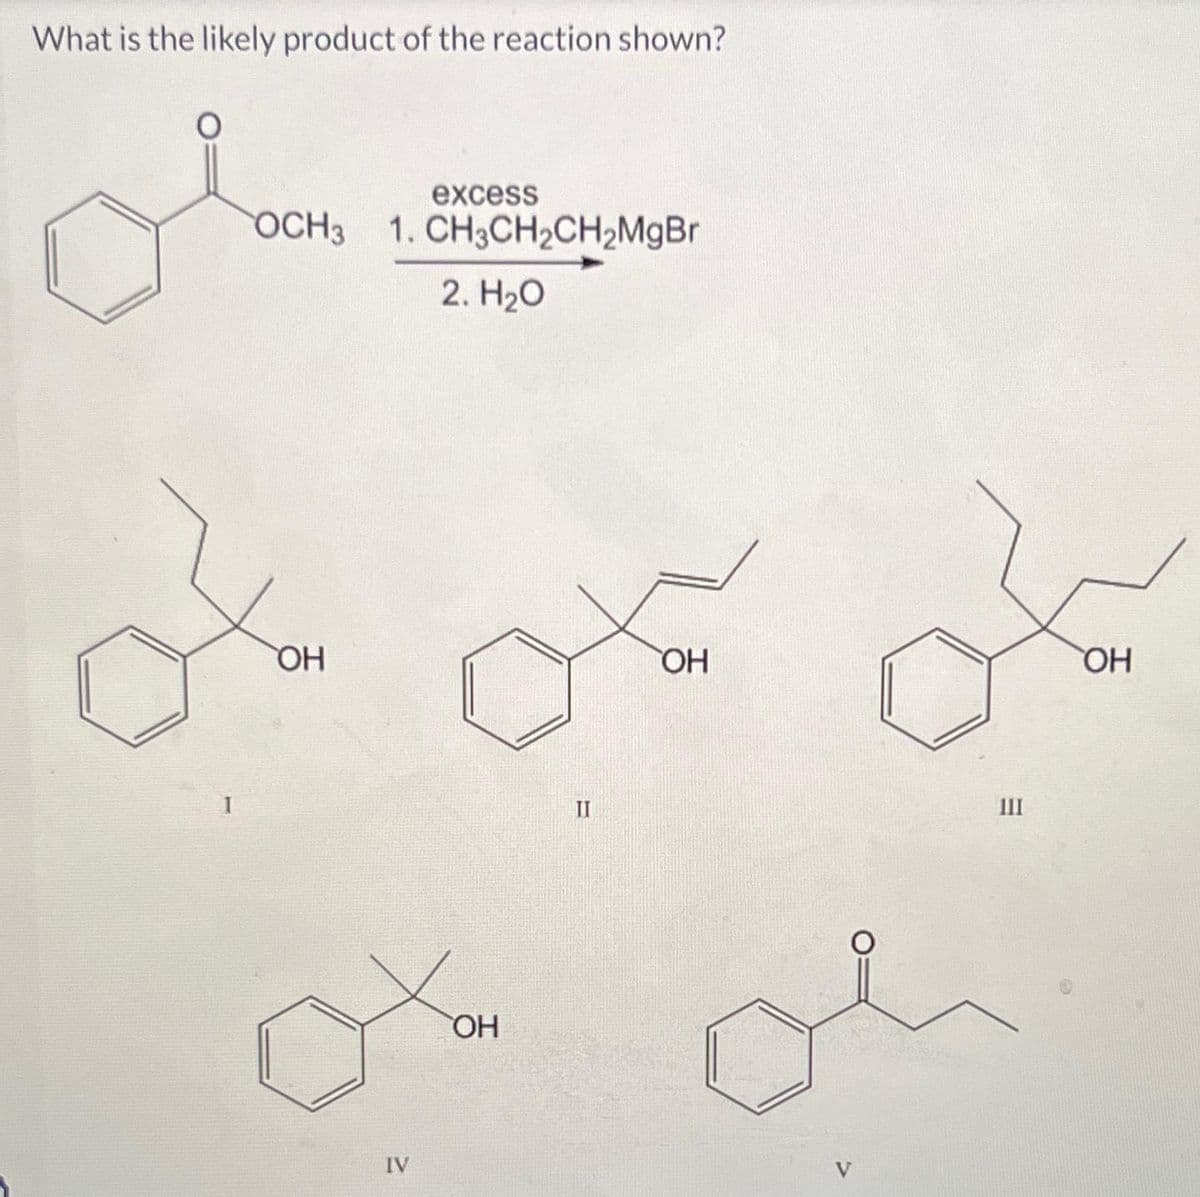 What is the likely product of the reaction shown?
olan
OCH3 1. CH3CH₂CH₂MgBr
2. H₂O
o
OH
excess
IV
OH
II
OH
V
E
OH